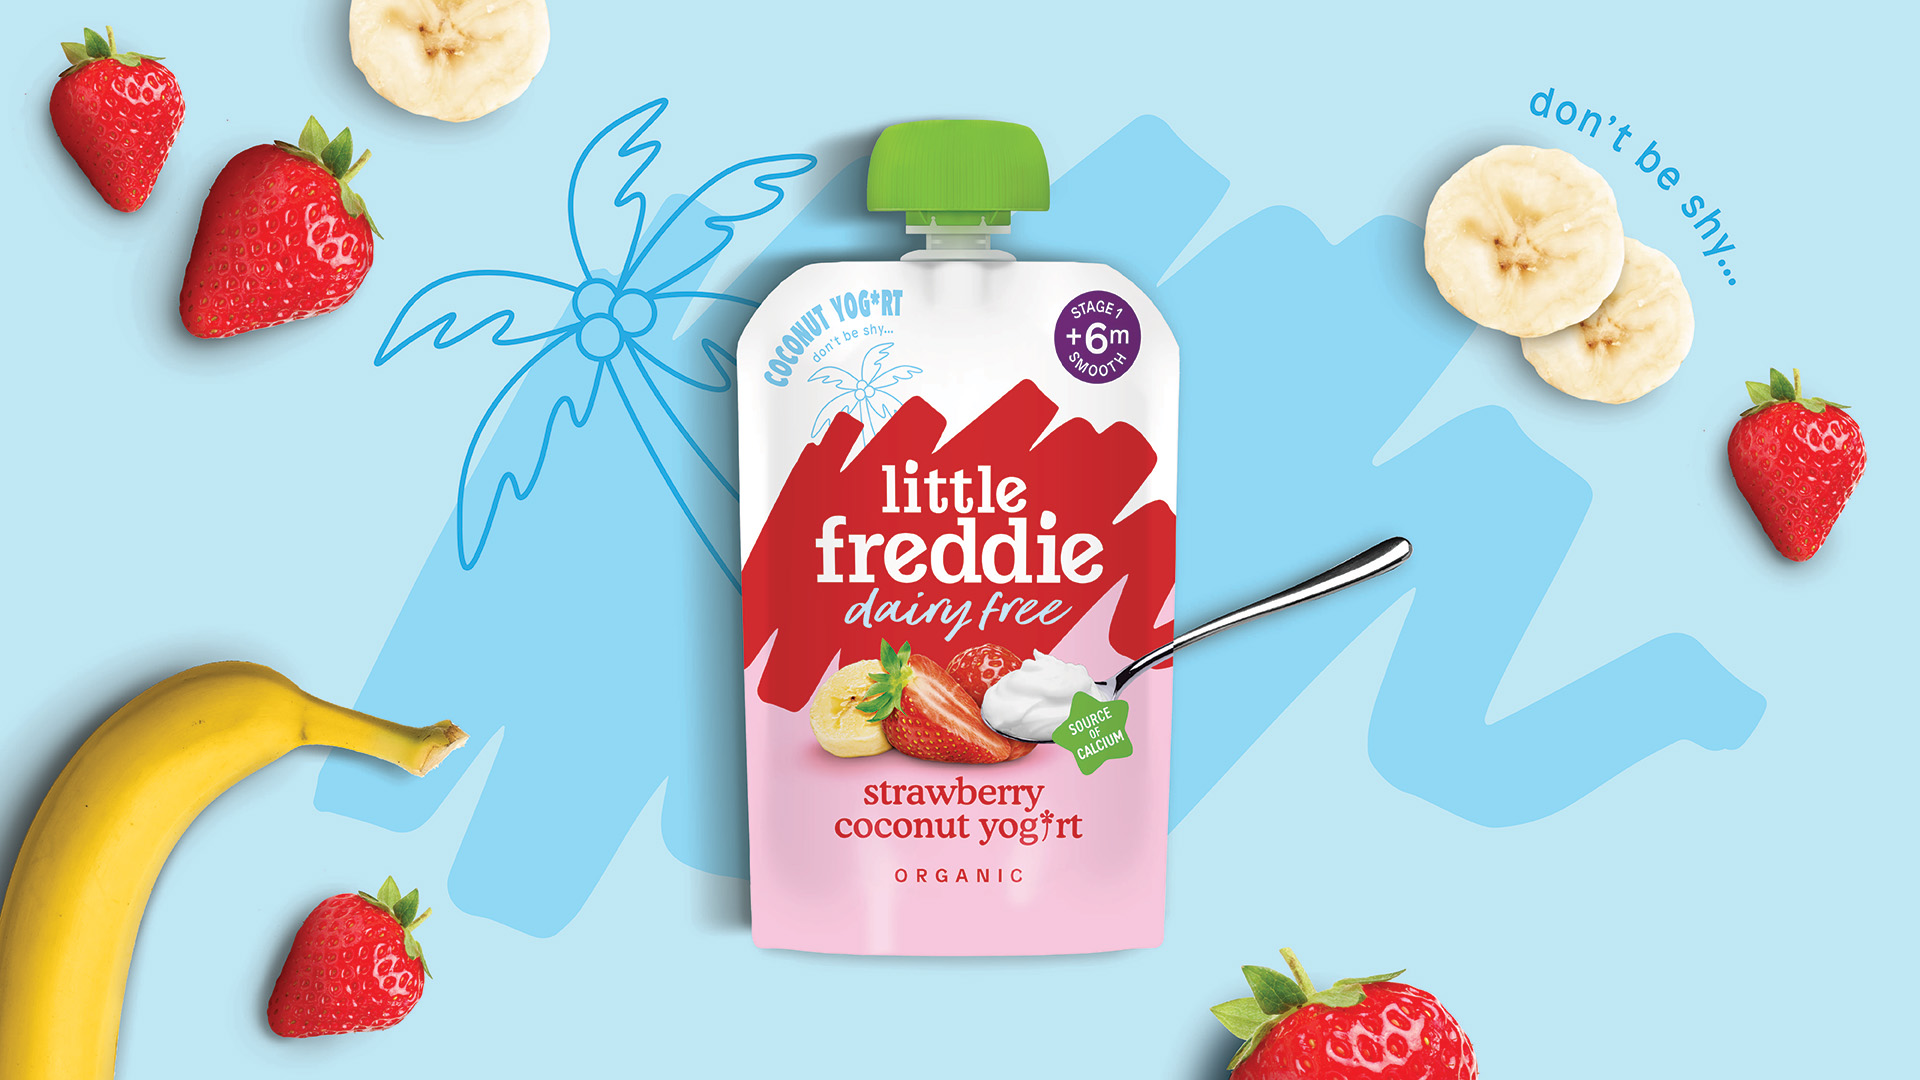 Lewis Moberly Creates new Design System for Organic Baby Food Brand Little Freddie